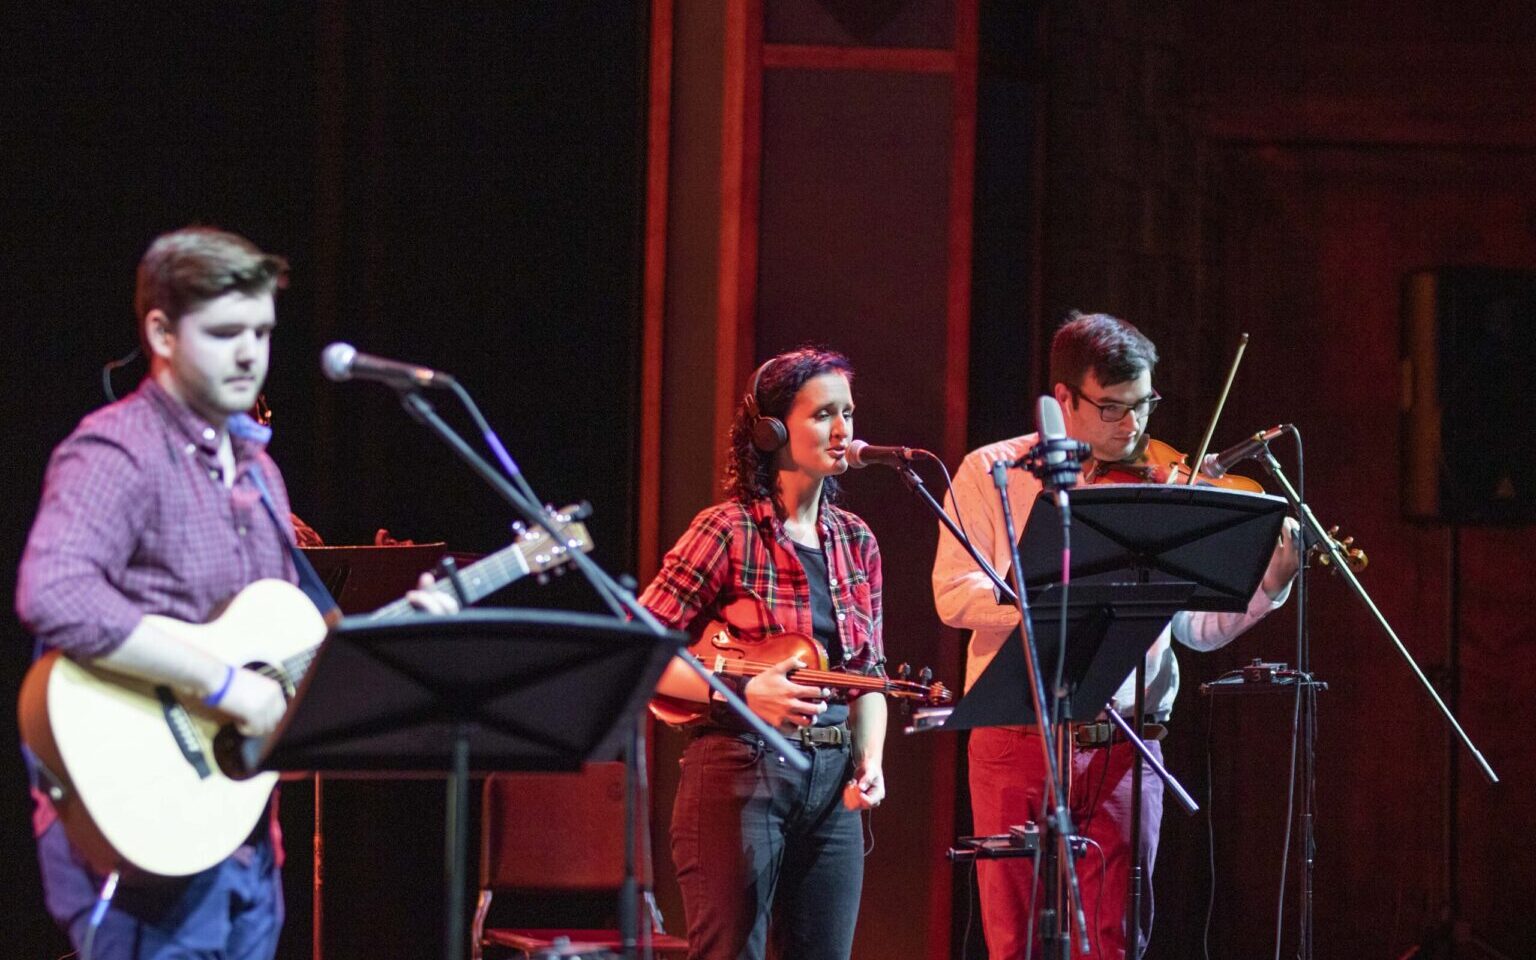 Student musicians on stage.